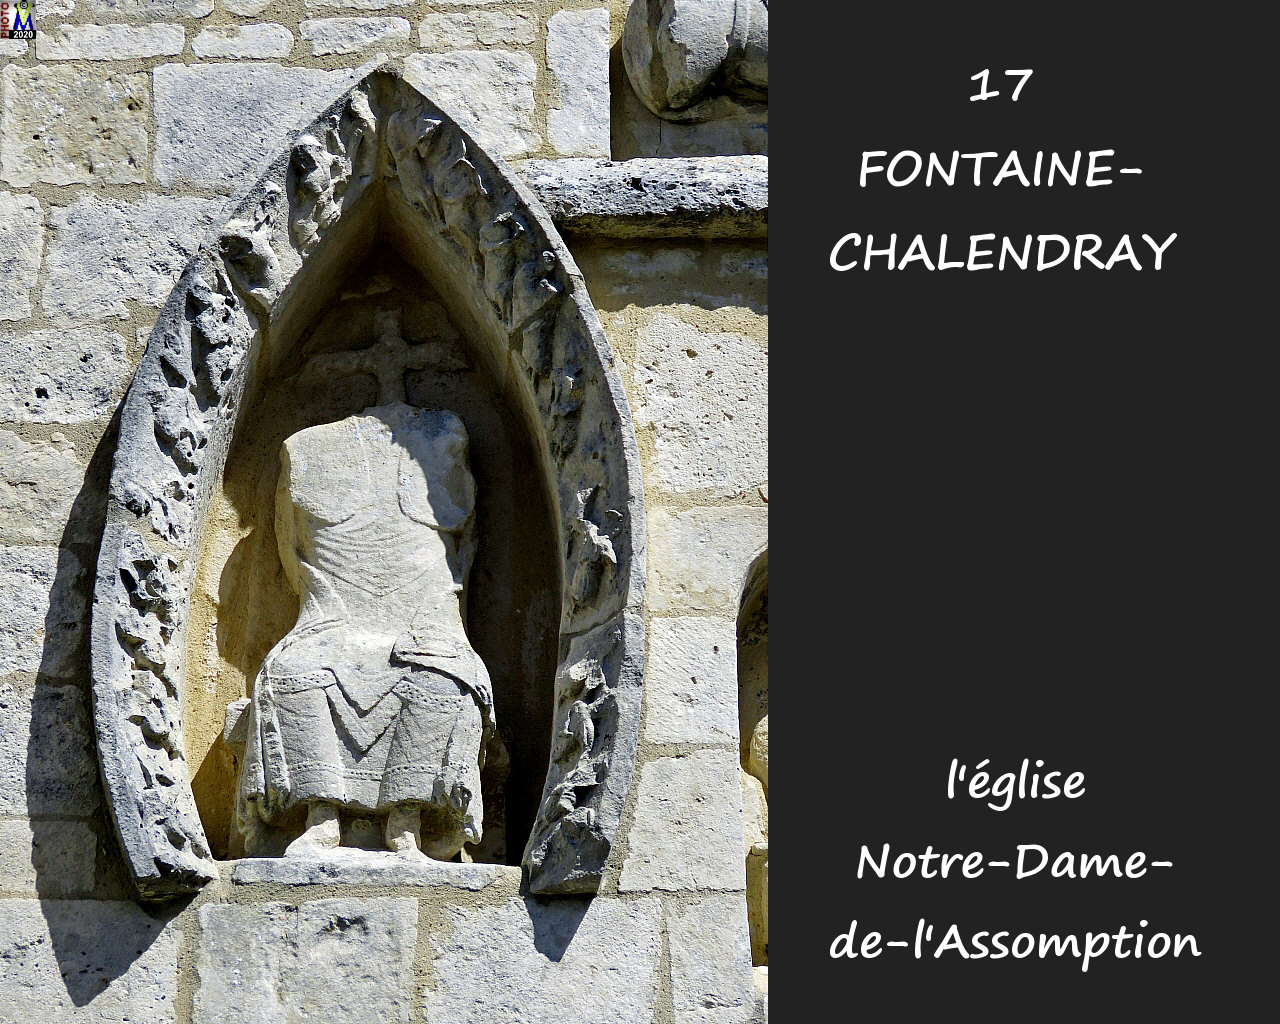 17FONTAINE-CHALENDRAY_eglise_1030.jpg